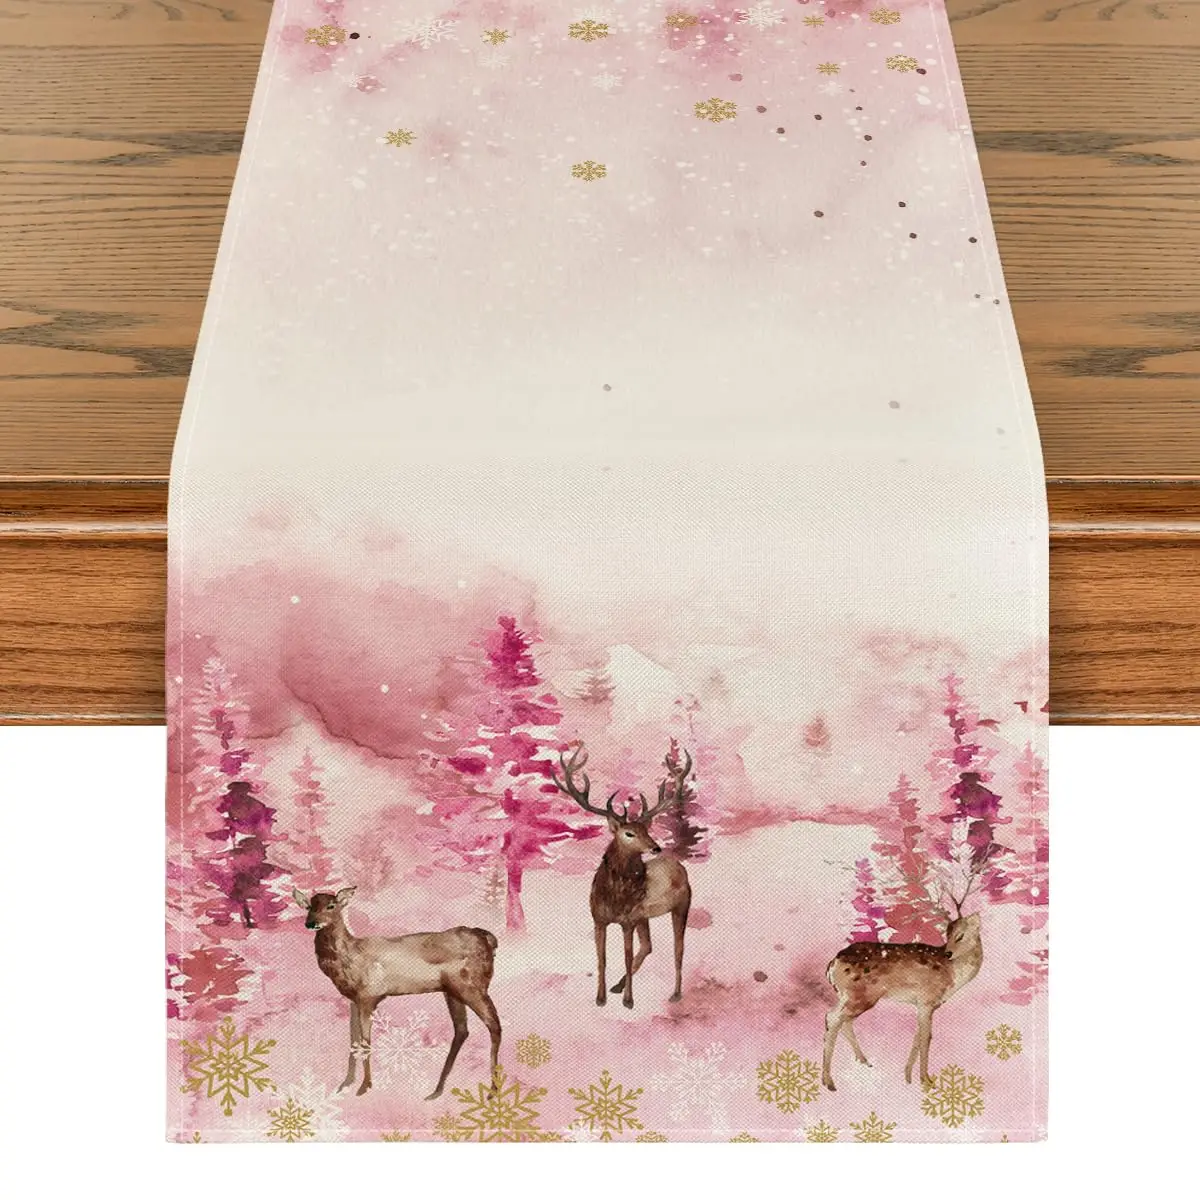 

Watercolor Christmas Table Runner, Deer Trees, Snowflakes, Xmas, Holiday, Kitchen, Dining Table Decoration, Home Party Decor